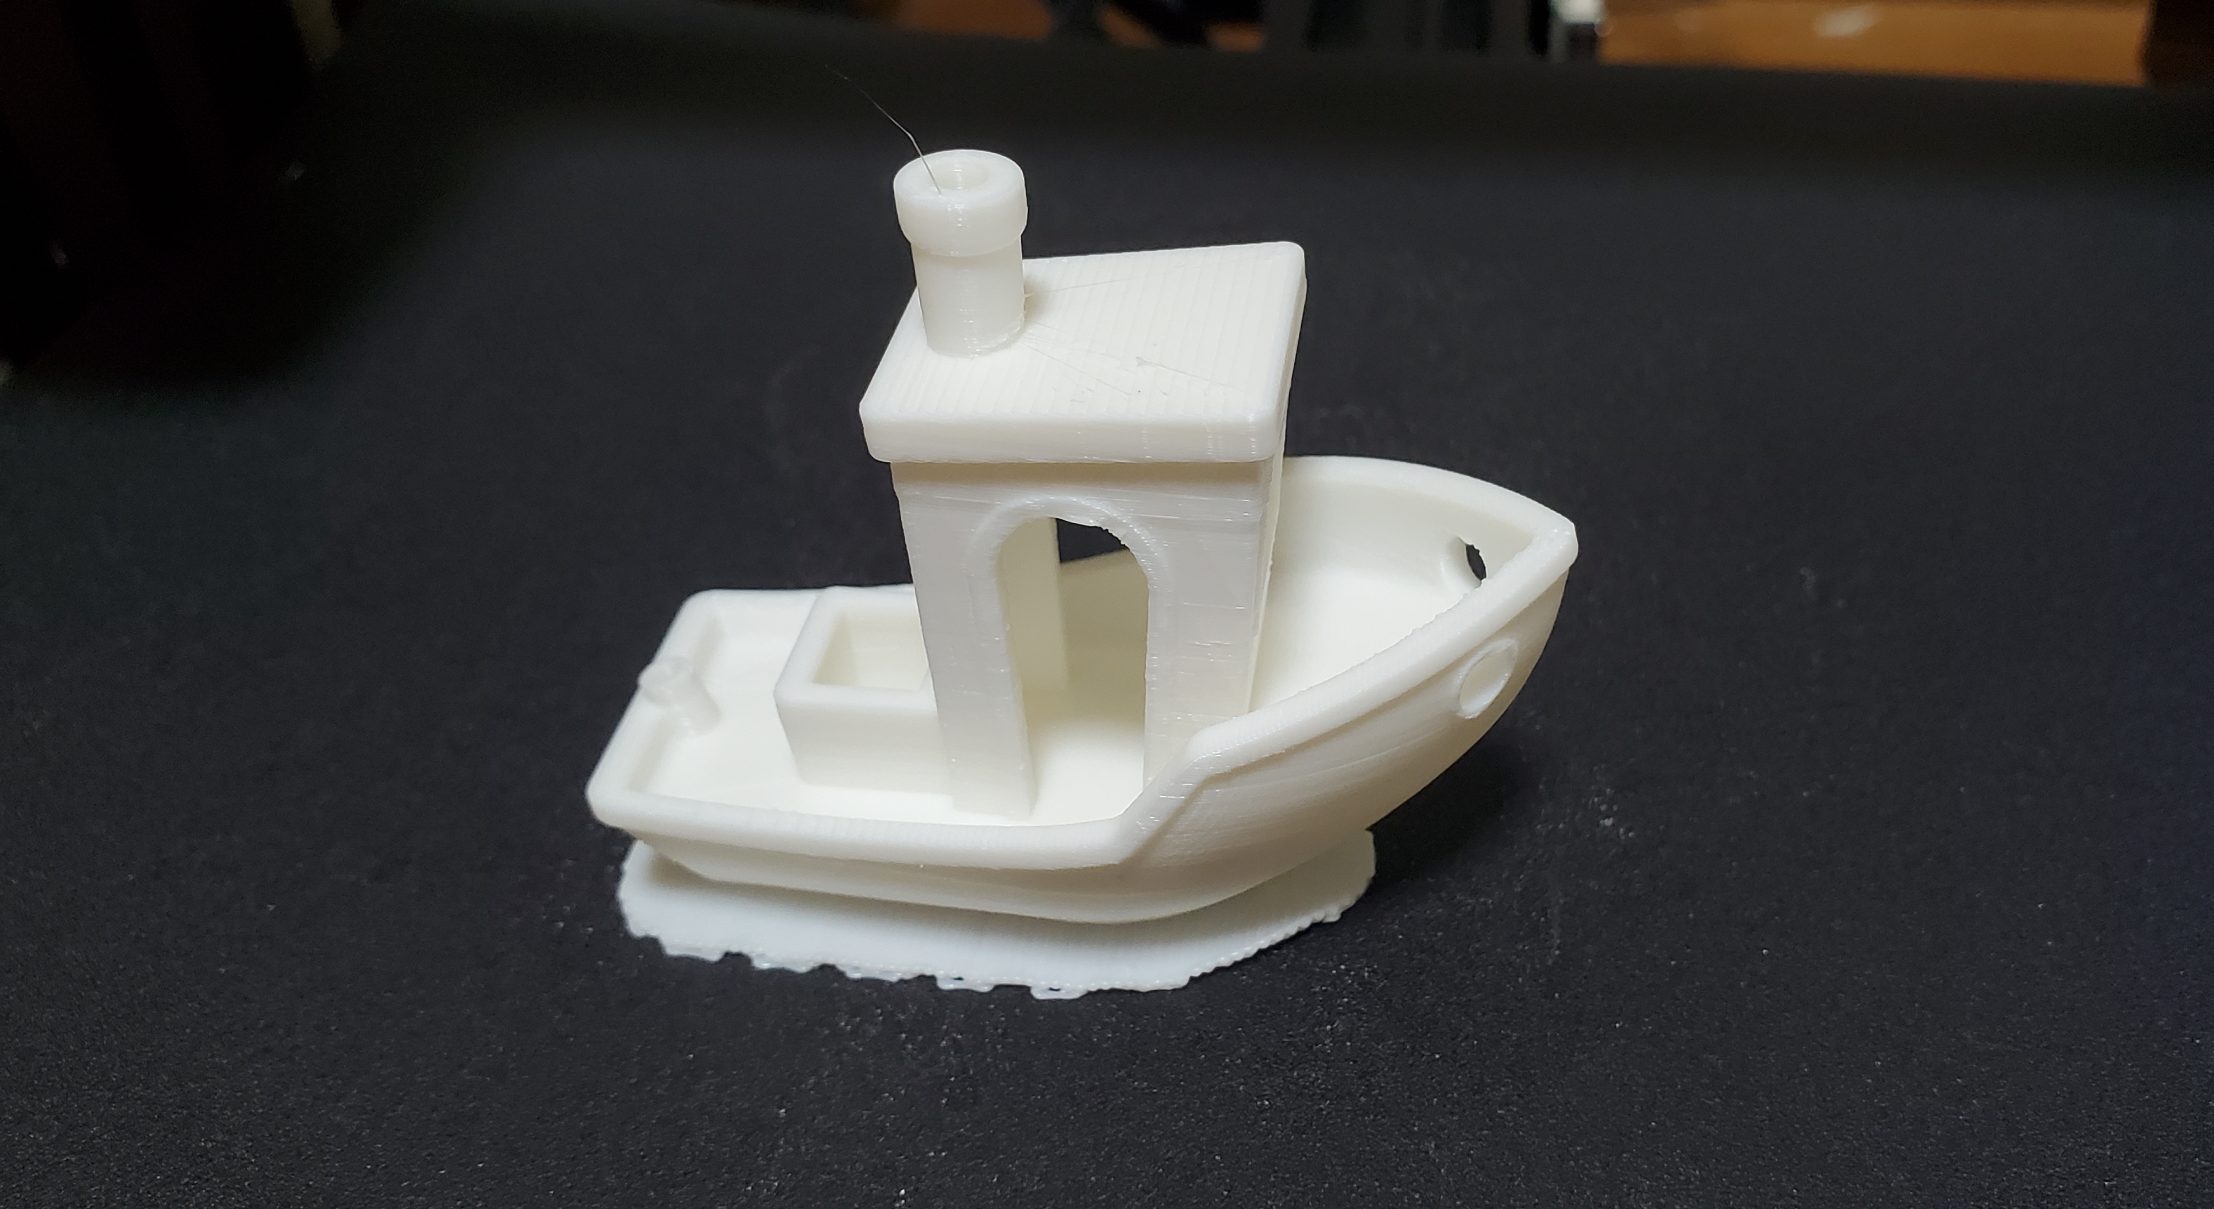 Differences Between Raft, Brim, and Skirt in 3D Printing